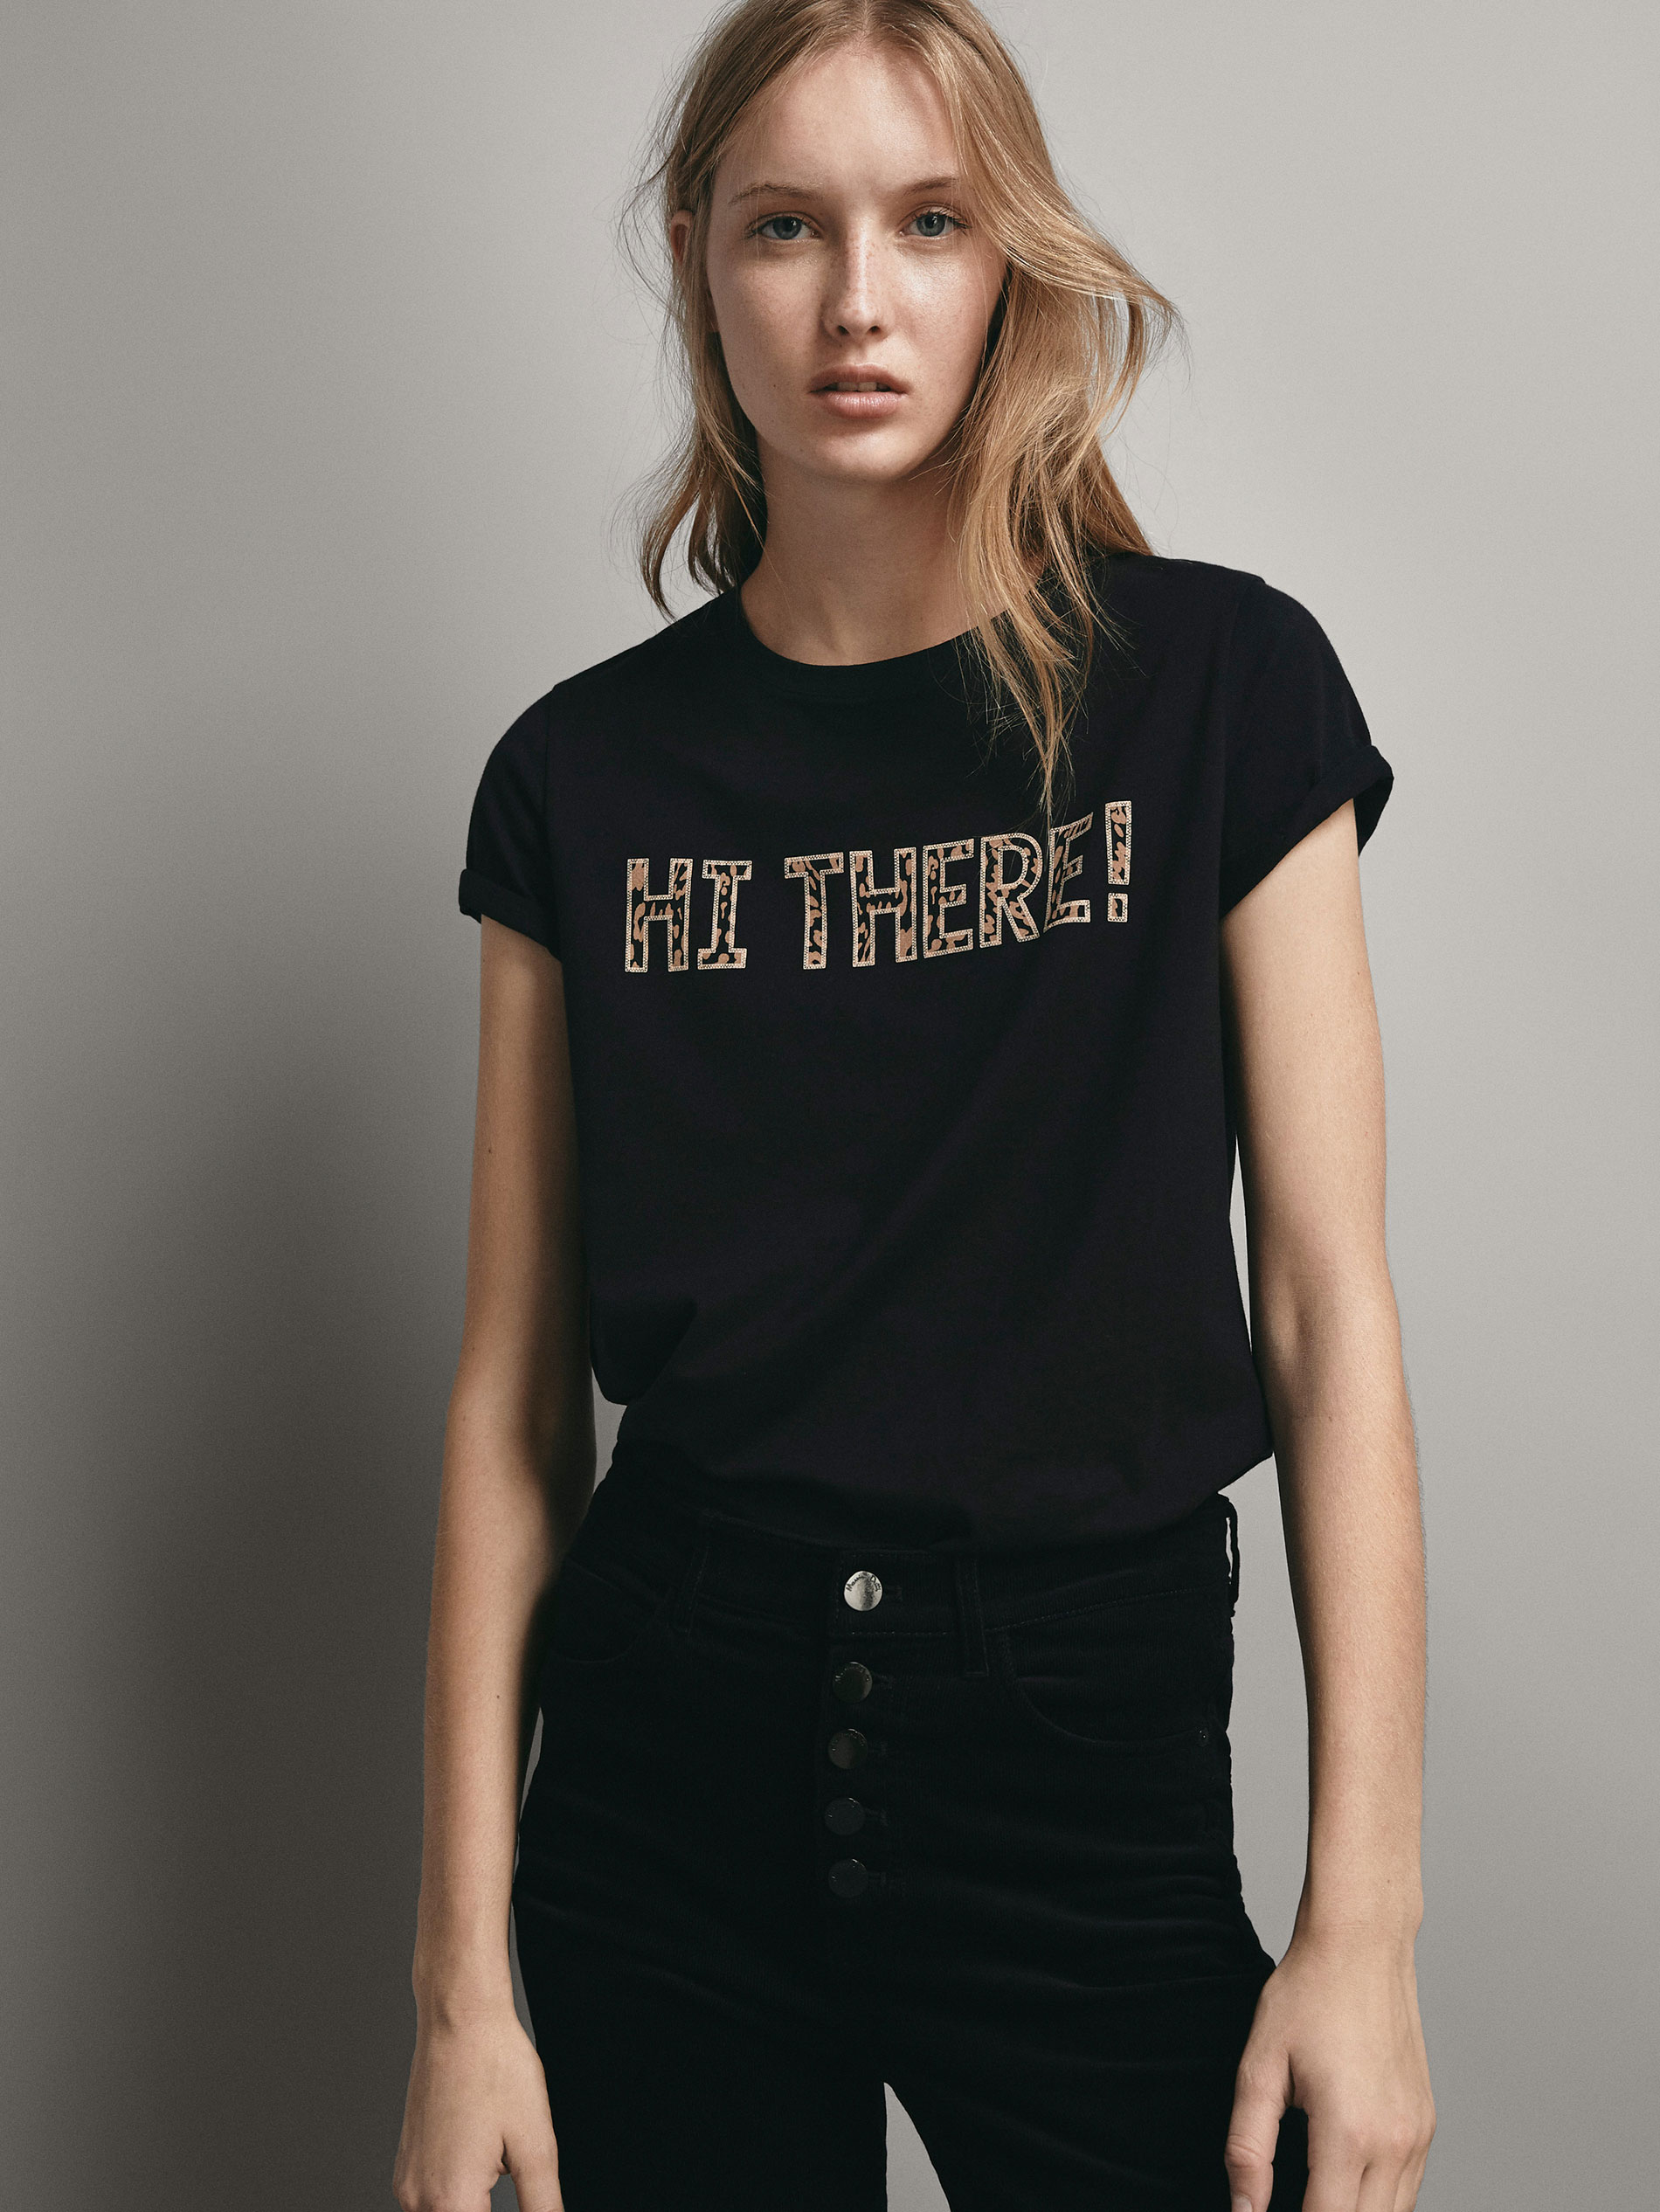 Massimo Dutti COTTON ‘HI THERE’ T-SHIRT at £24.95 | love the brands